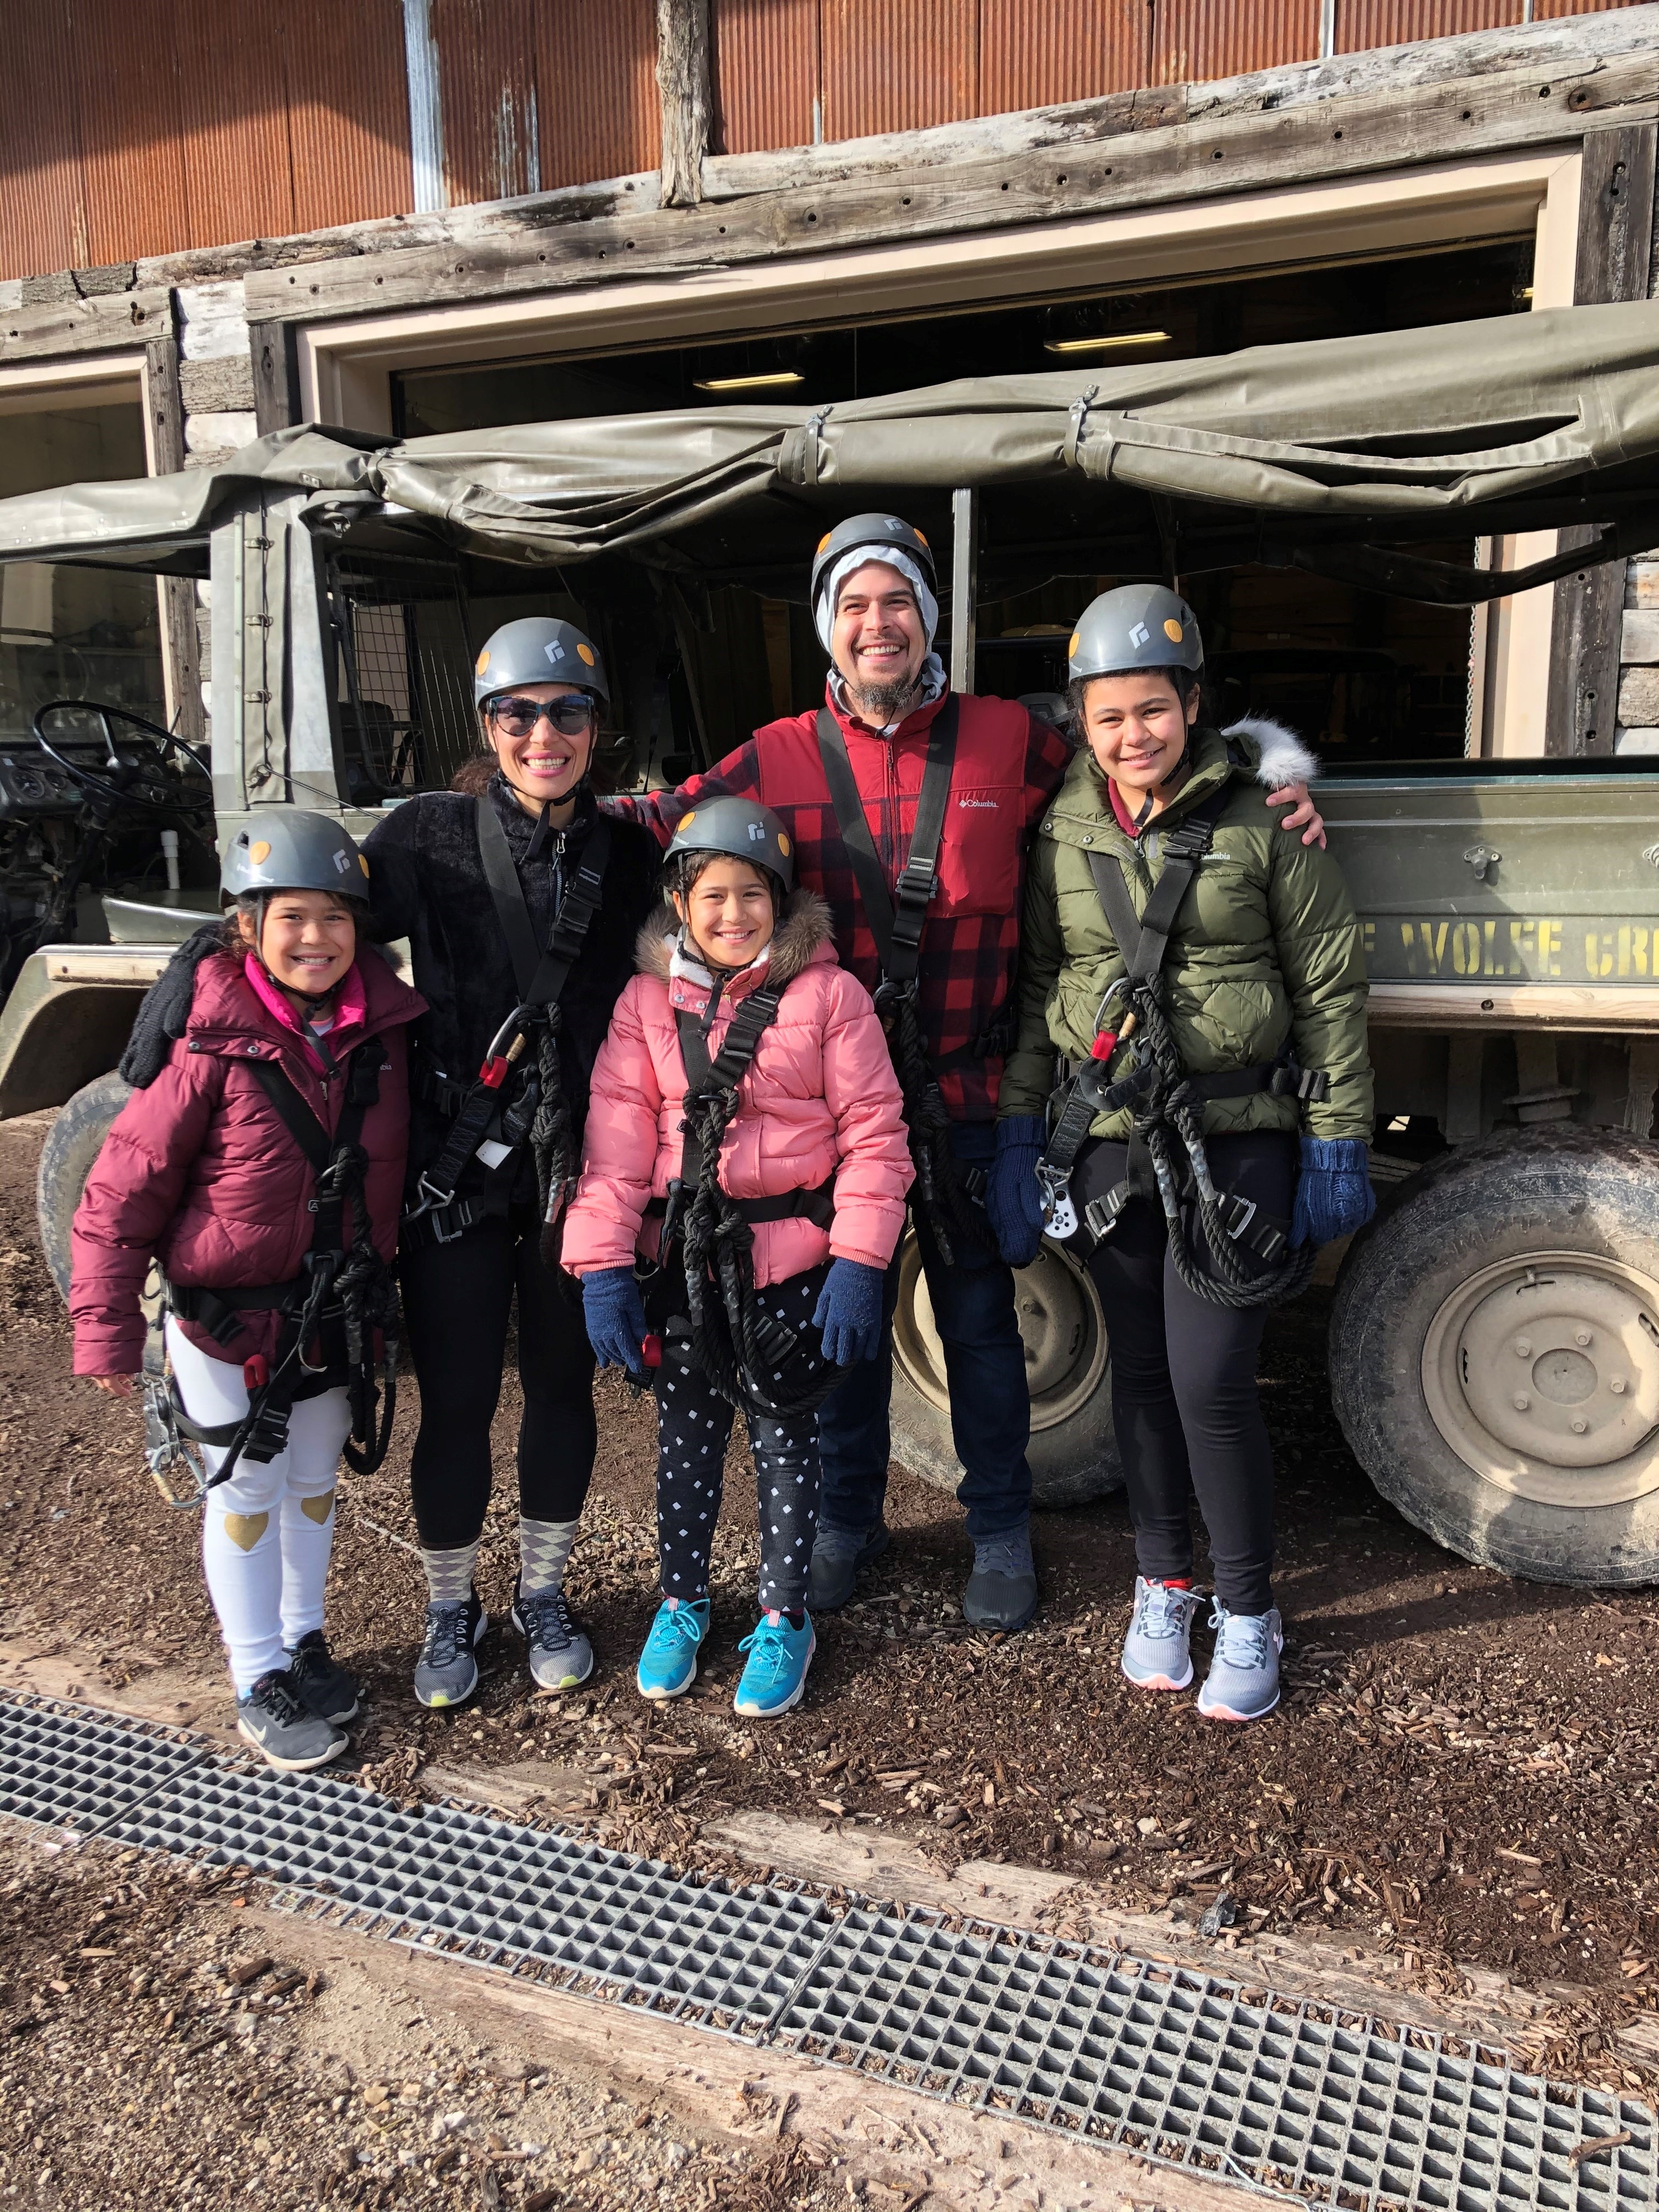 Family in coats and helmets next to off-road vehicle